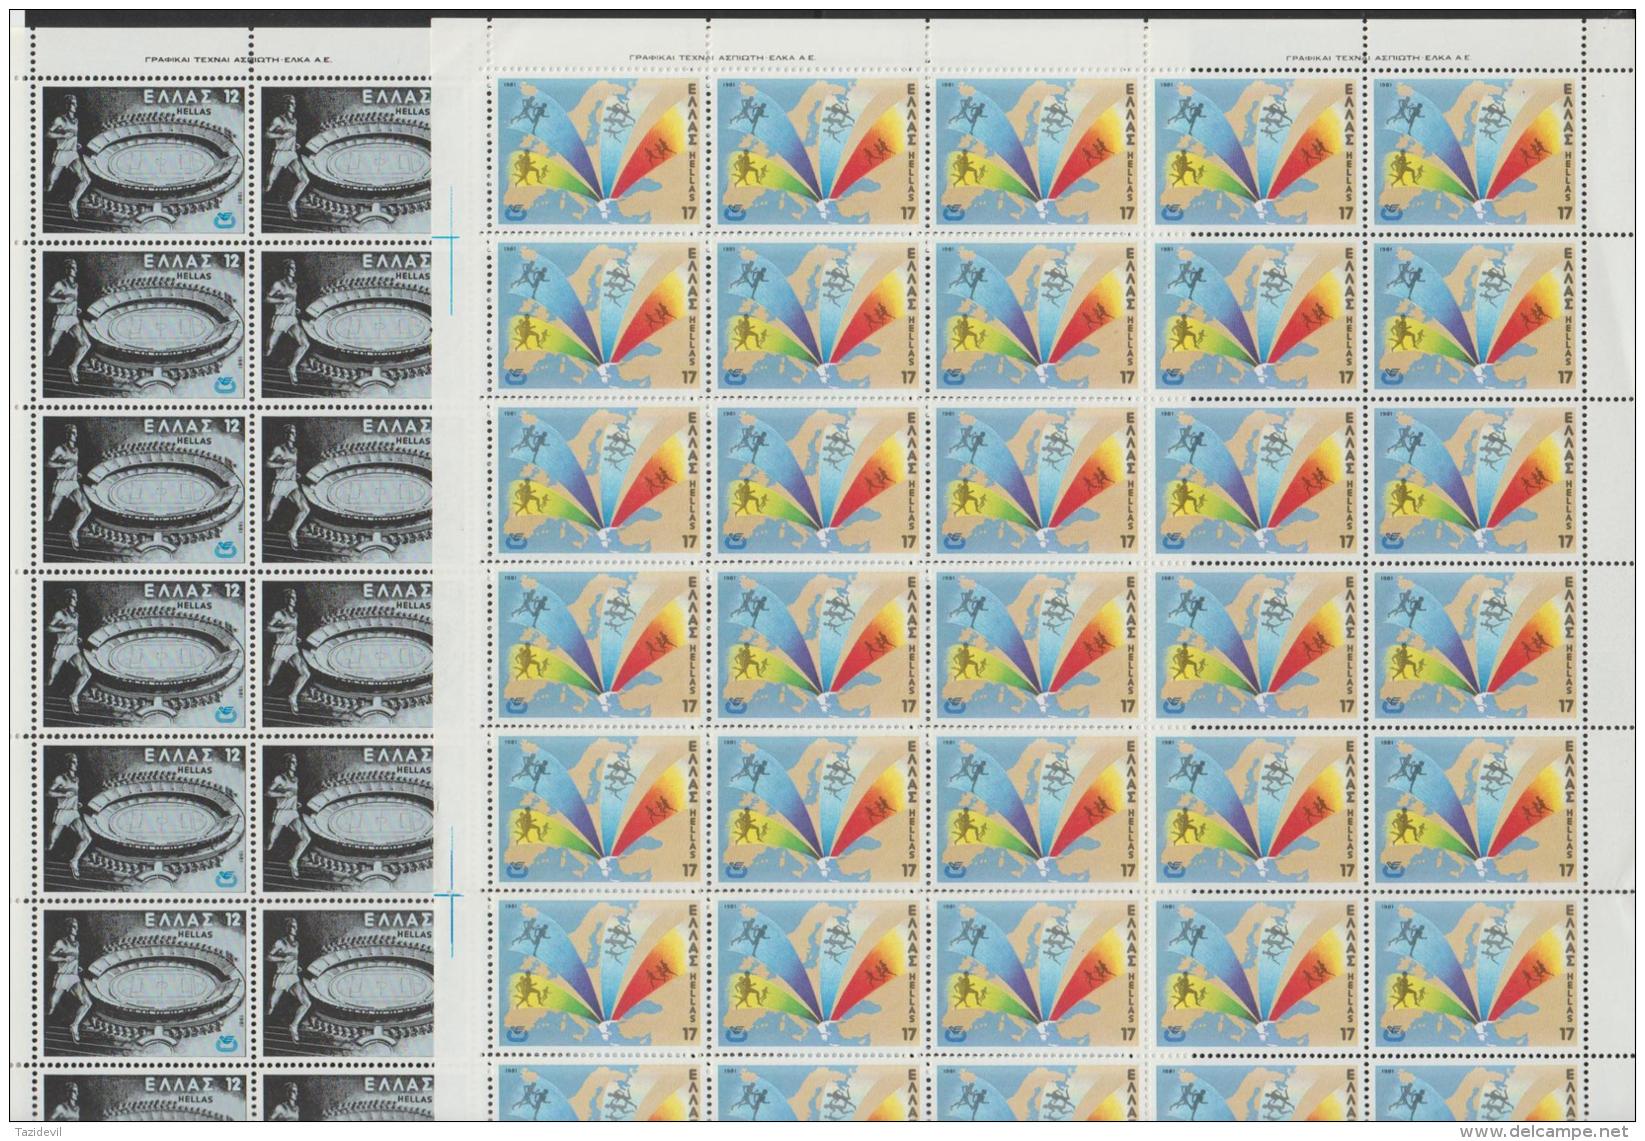 GREECE - 1981 Athletic Championships - Olympic Stadium Part Sheets Of 45. Scott 1388-89. MNH ** Priced To Clear - Feuilles Complètes Et Multiples